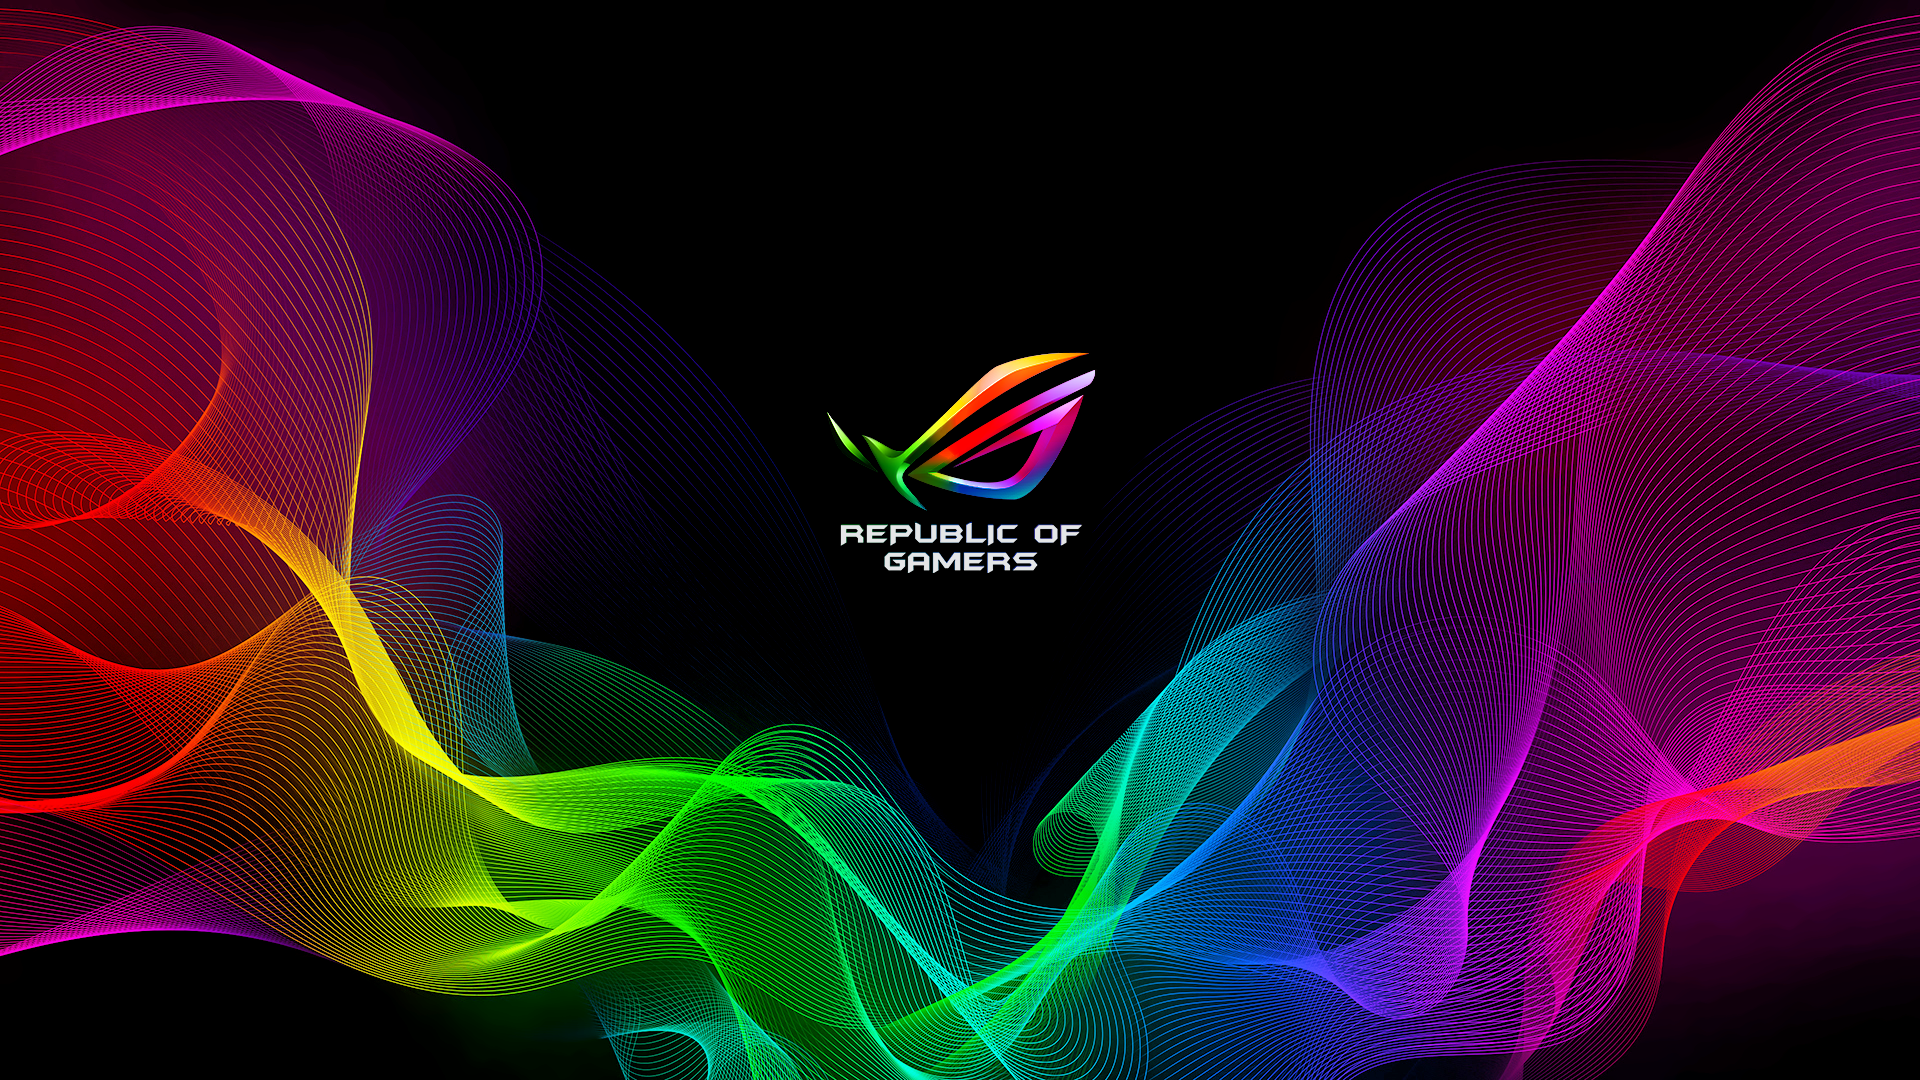 Rgb Rog Wallpaper Based On The One From Razer Live